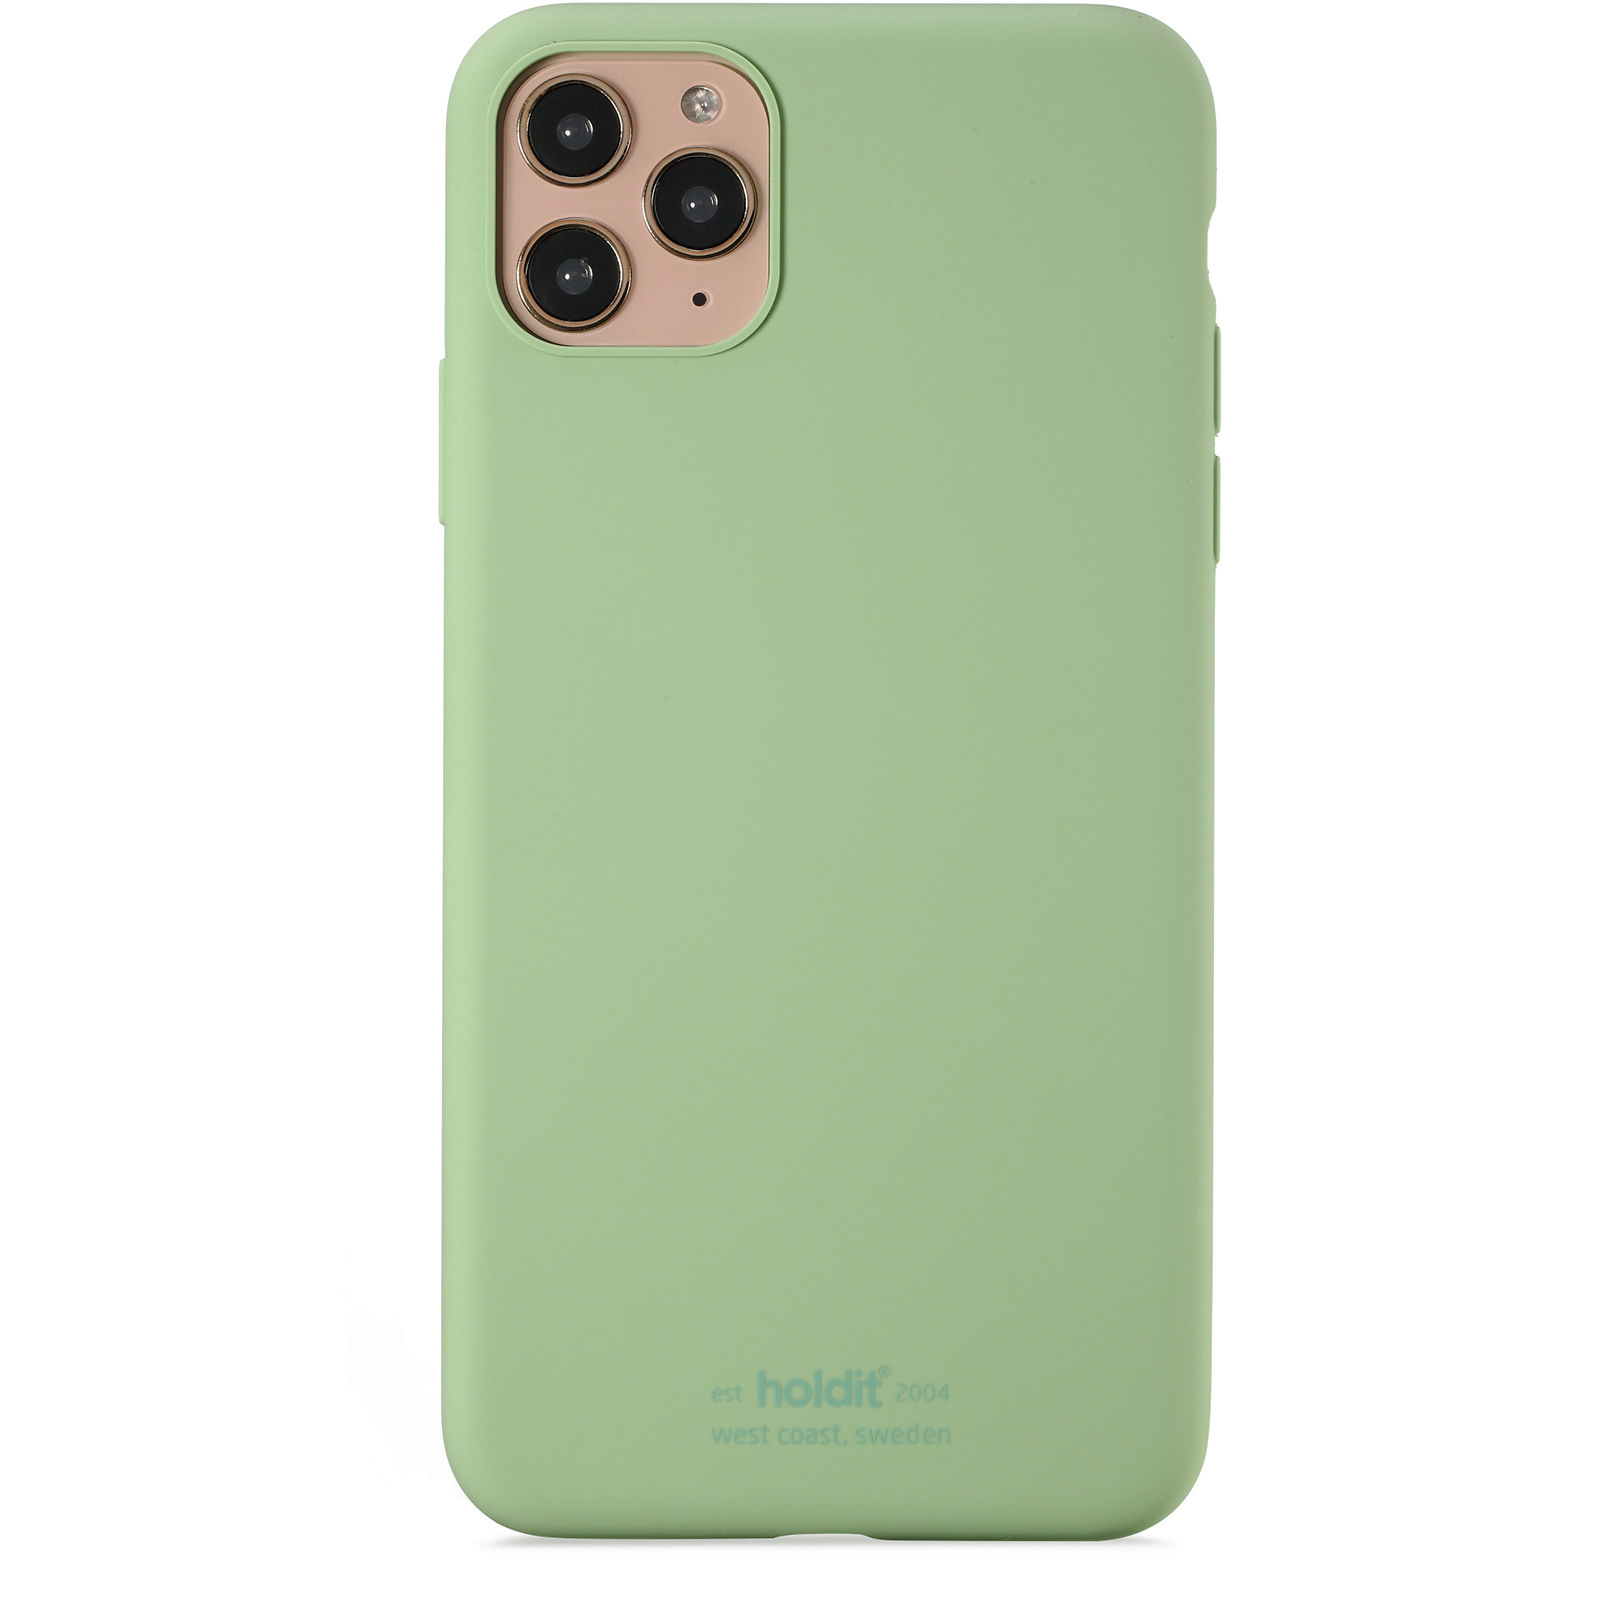 iPhone 11 Pro Max, case silicone, jade green